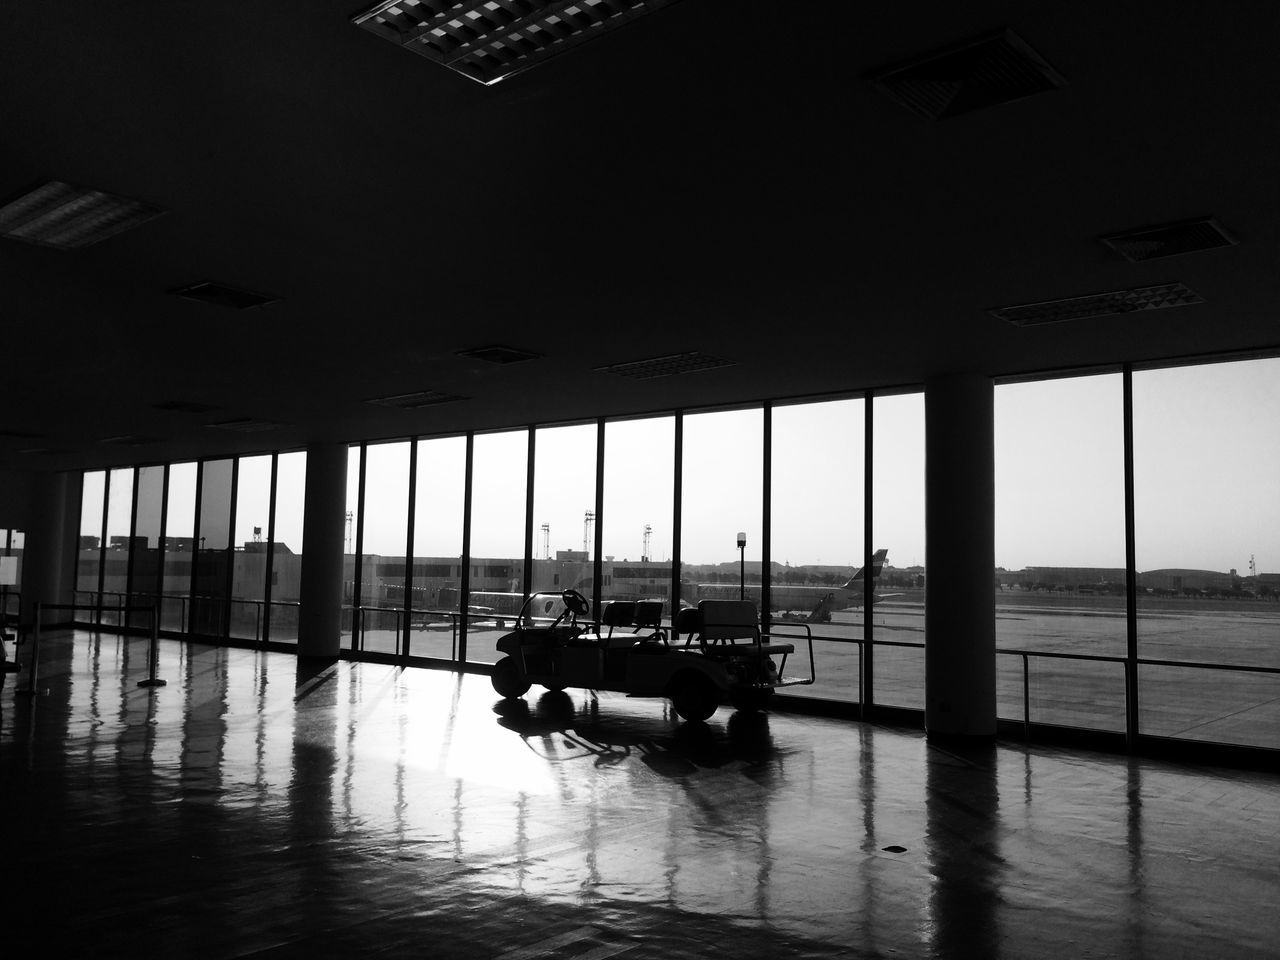 transportation, water, mode of transport, sea, silhouette, nautical vessel, built structure, indoors, men, reflection, travel, window, architecture, airport, horizon over water, boat, lifestyles, unrecognizable person